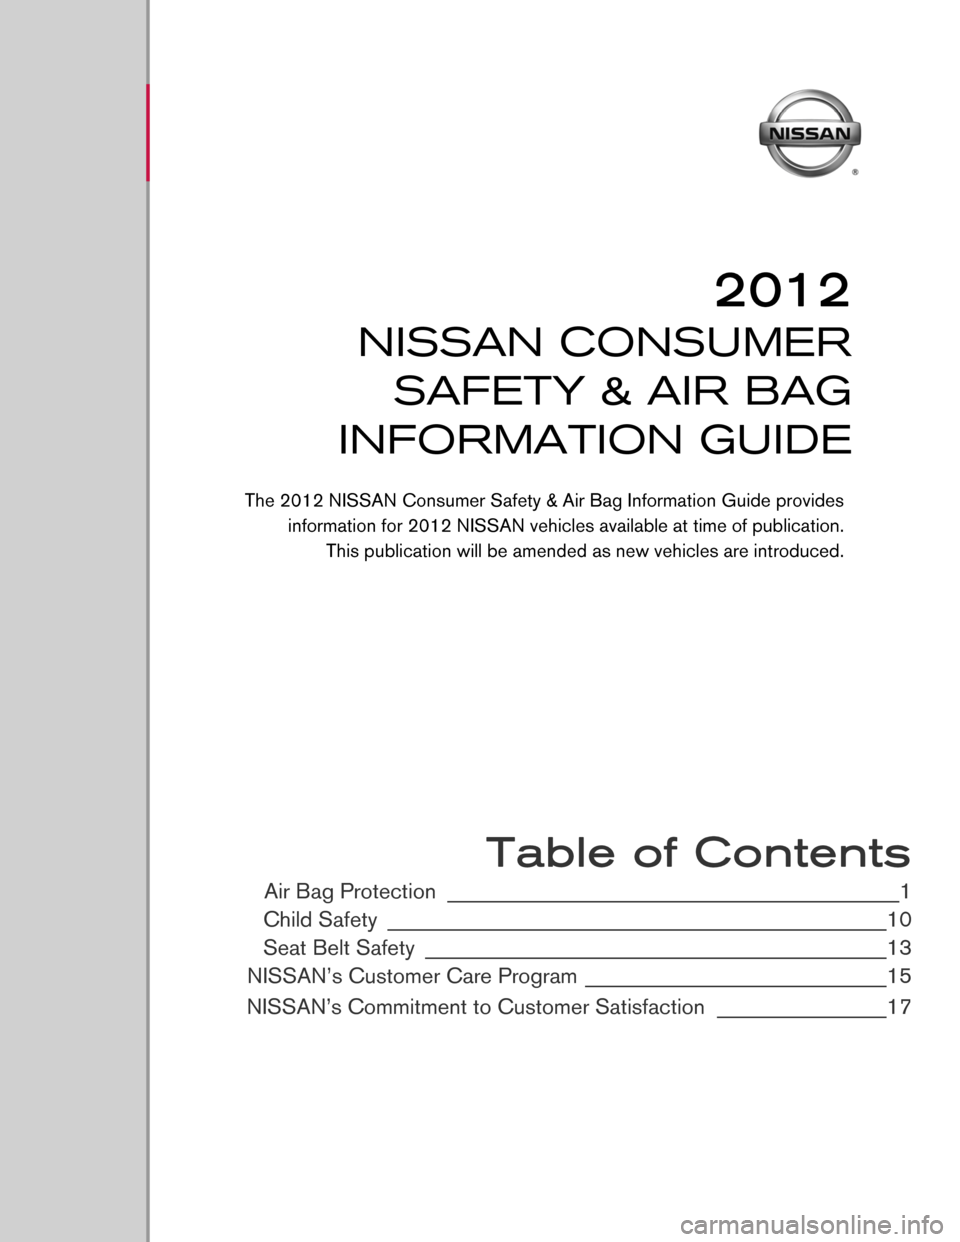 NISSAN PATHFINDER 2012 R52 / 4.G Consumer Safety Air Bag Information Guide  
 
 
 
 
 
 
 
 
 
 
 
 
 
 
 
 
 
 
 
 
 
 
 Table of Contents
Air Bag Protection ________________________________________________1
Child Safety
 ____________________________________________________